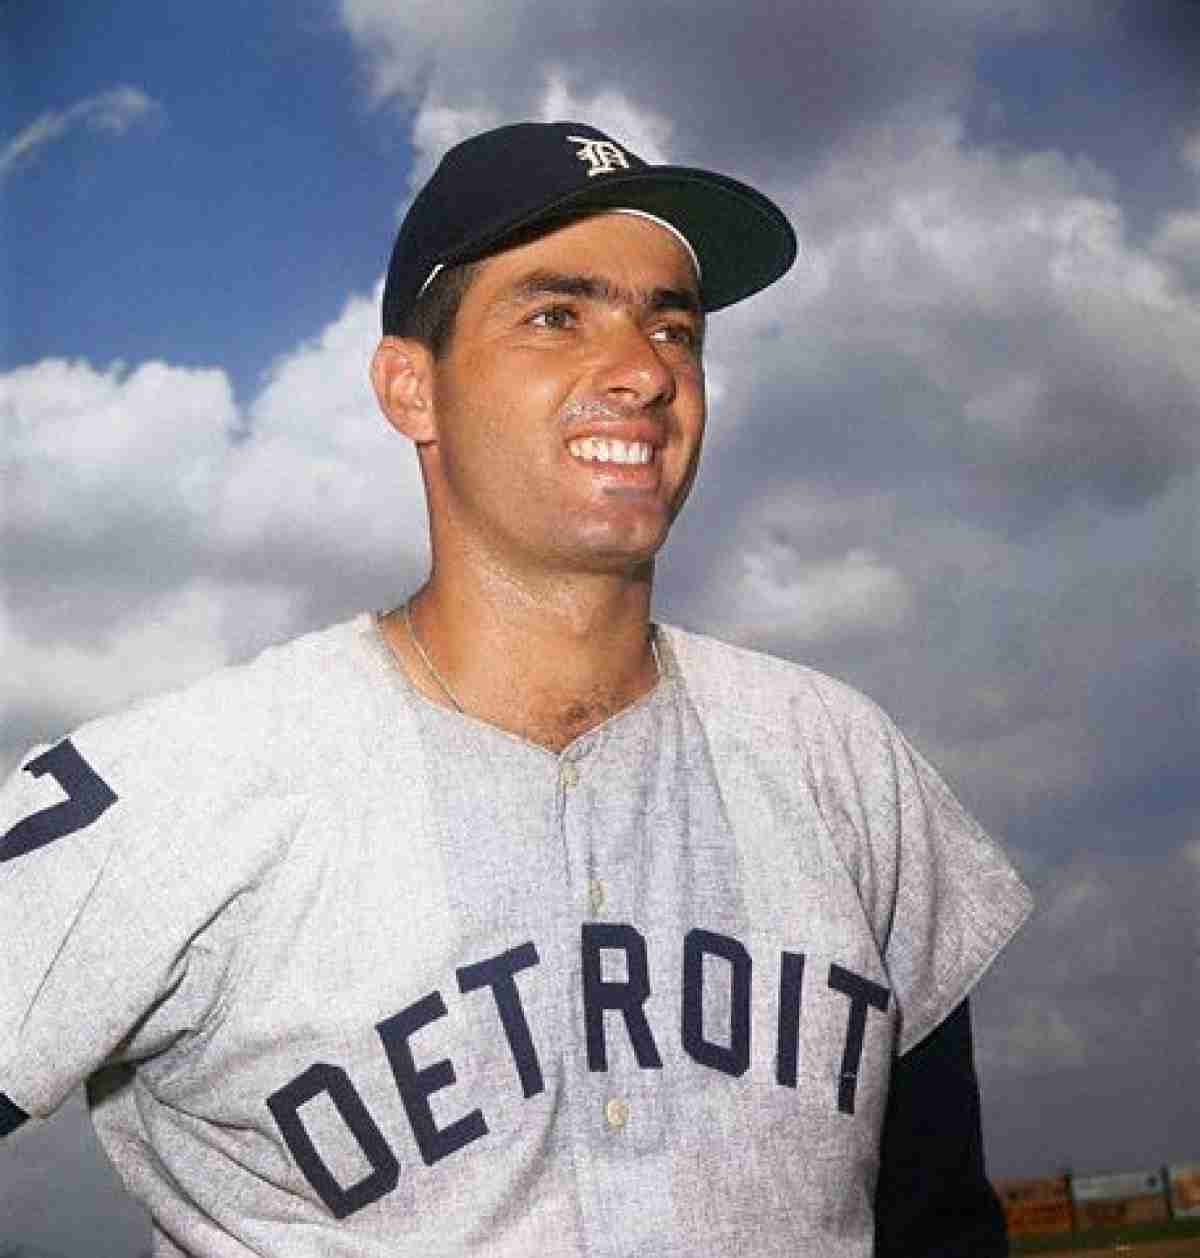 Not in Hall of Fame - 50. Rocky Colavito